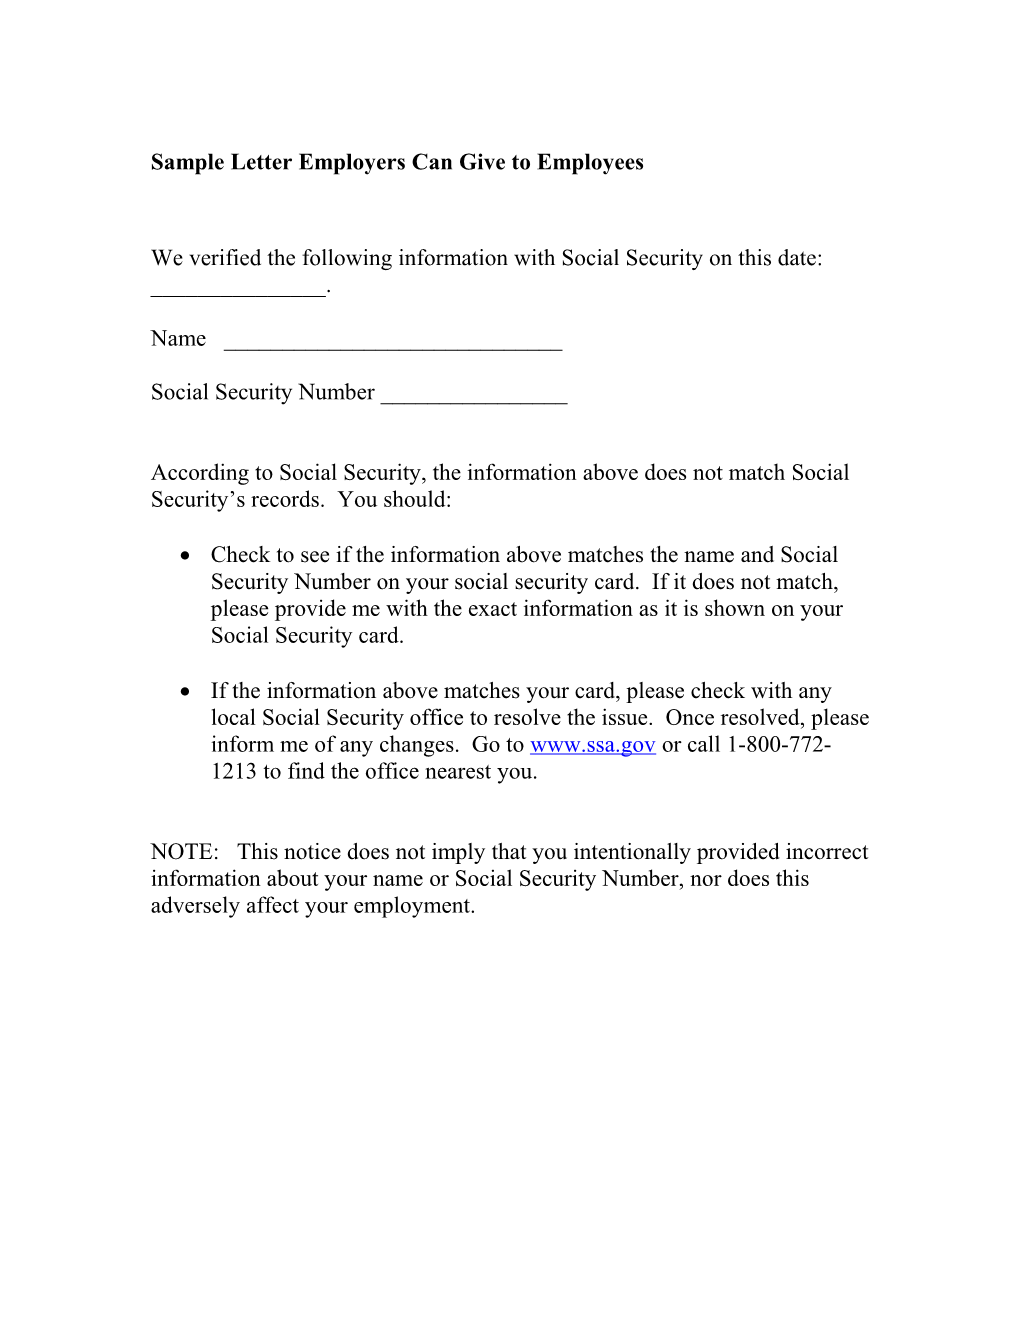 Sample Letter Employers Can Give To Employees